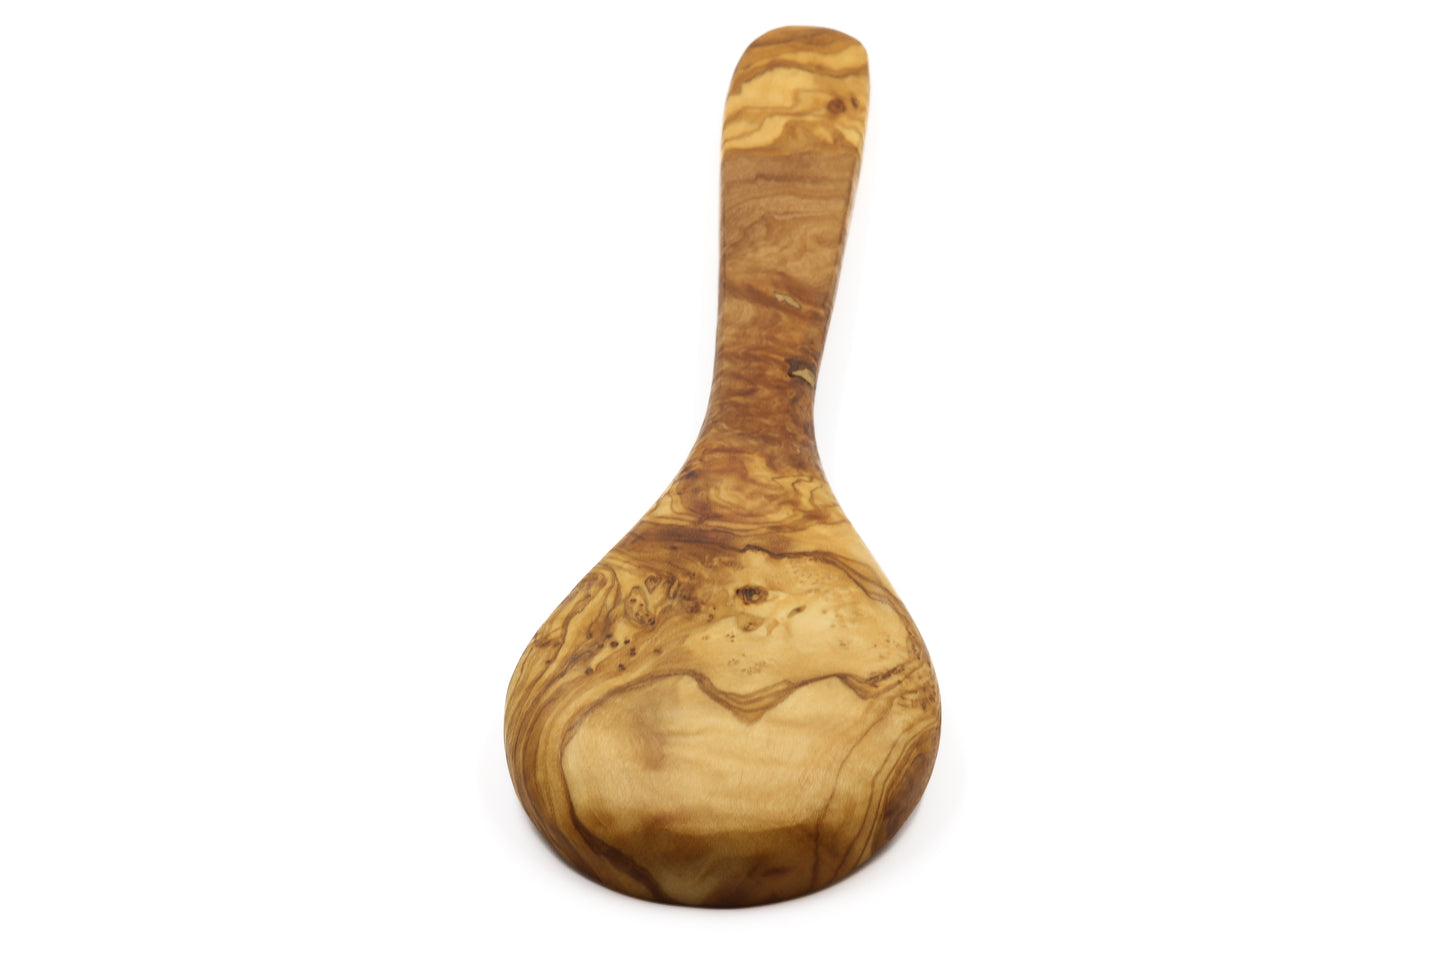 Olive wood large serving spoon, olive wood rice and potato server